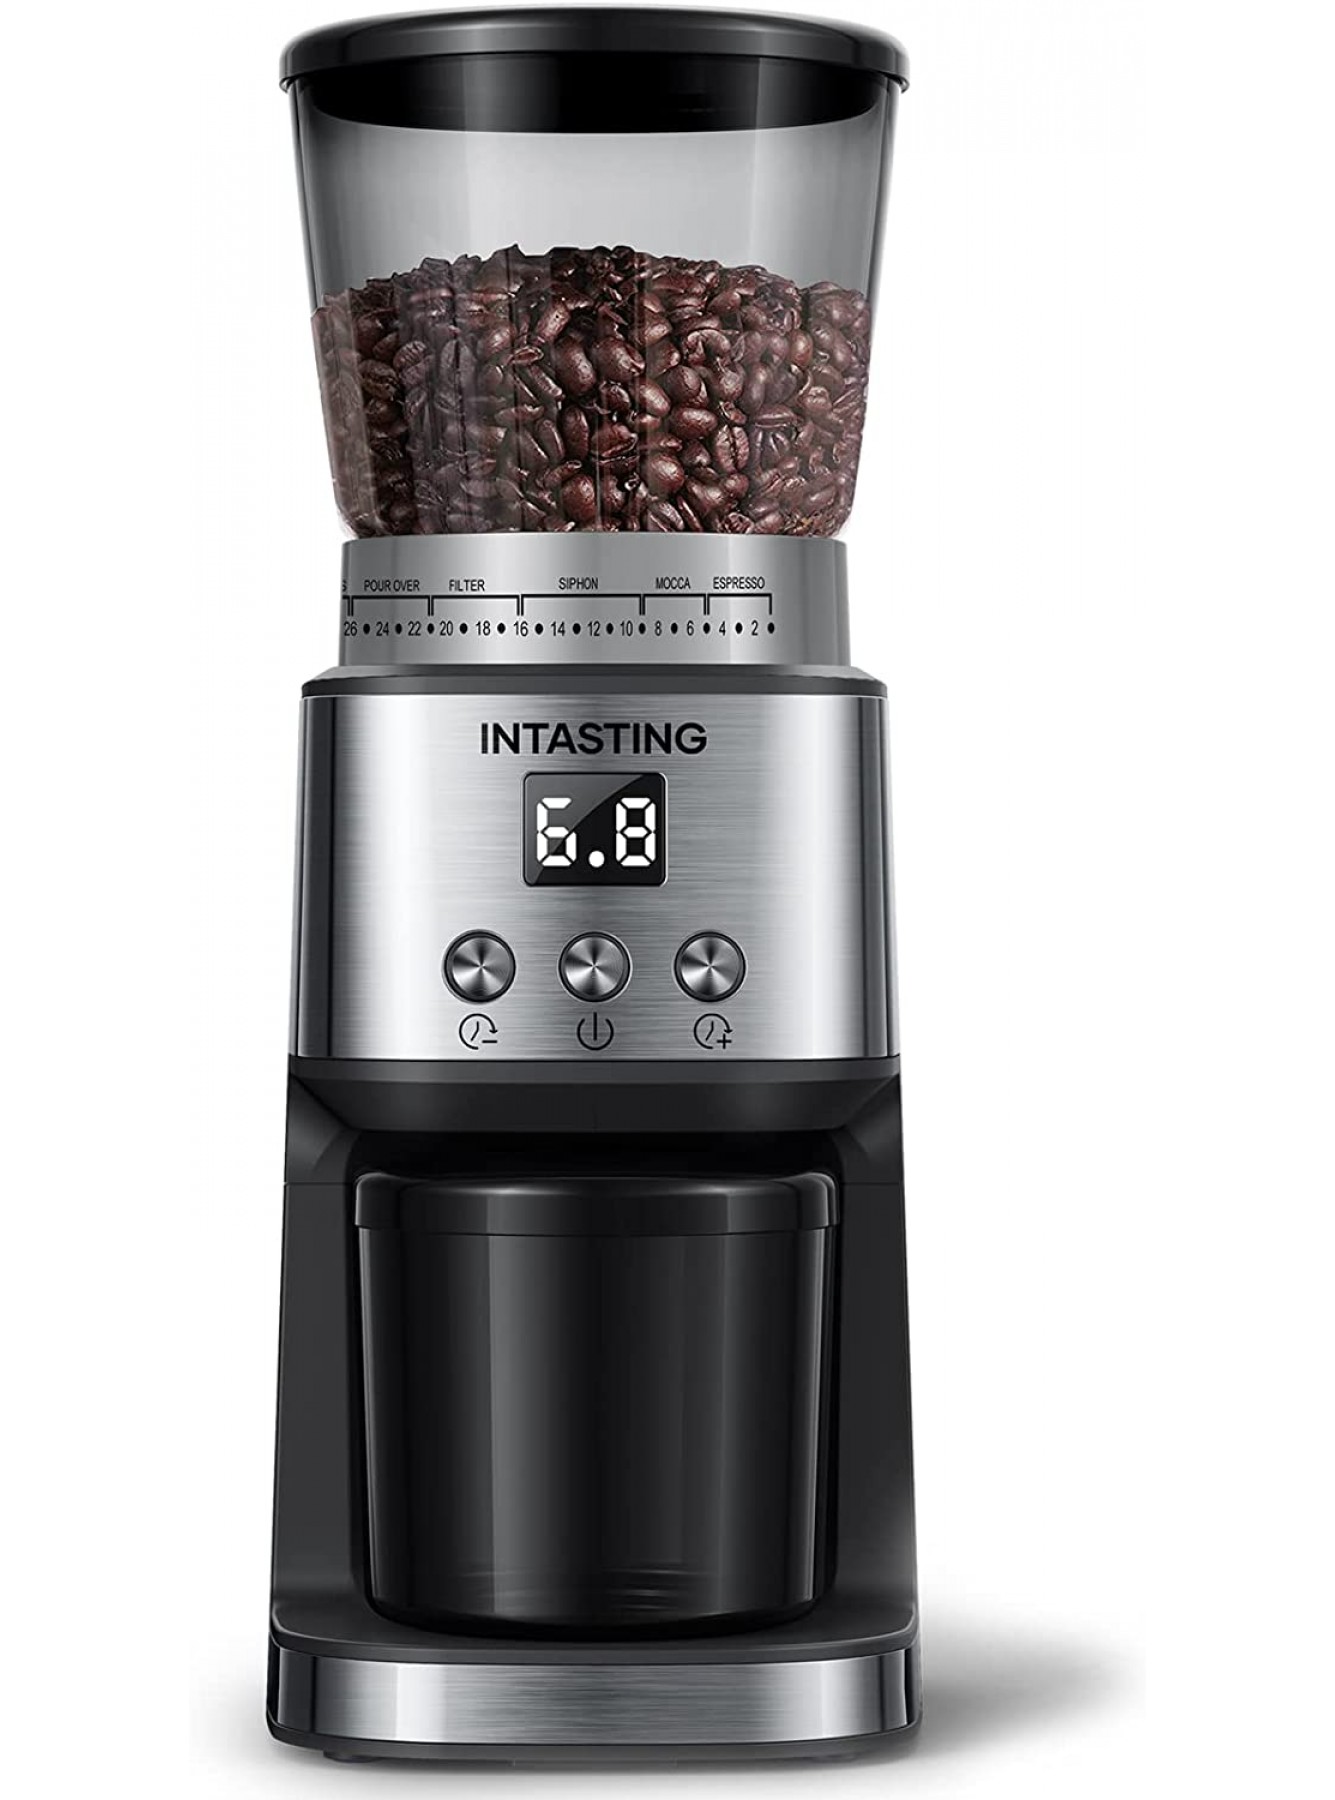 Secura Burr Coffee Grinder, Conical Burr Mill Grinder with 18 Grind  Settings from Ultra-fine to Coarse, Electric Coffee Grinder for French  Press, Percolator, Drip, American and Turkish Coffee Makers - The Secura